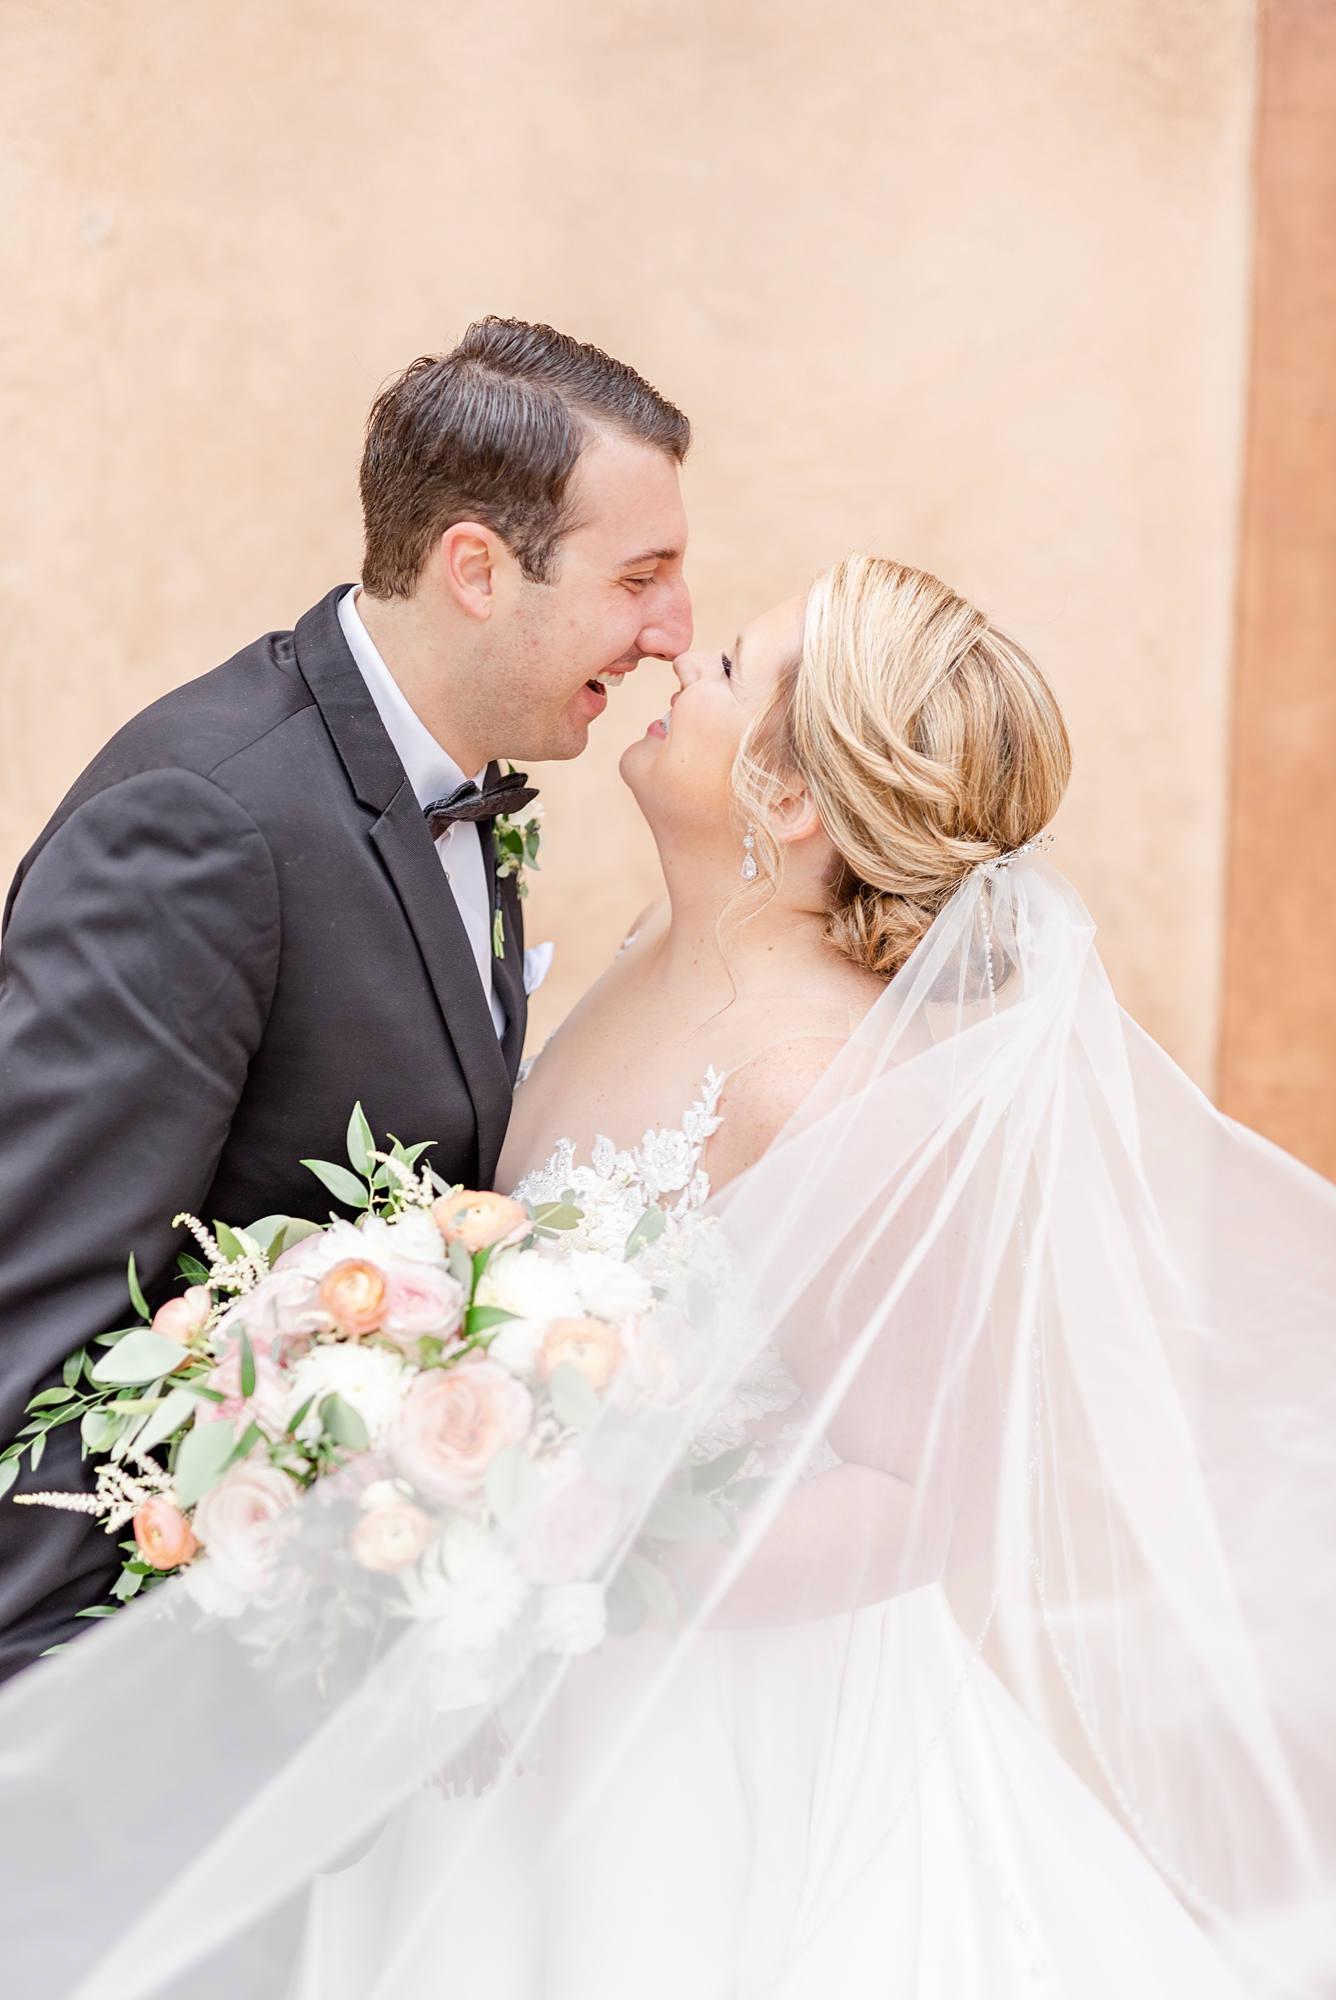 newlyweds touch noses during wedding photos